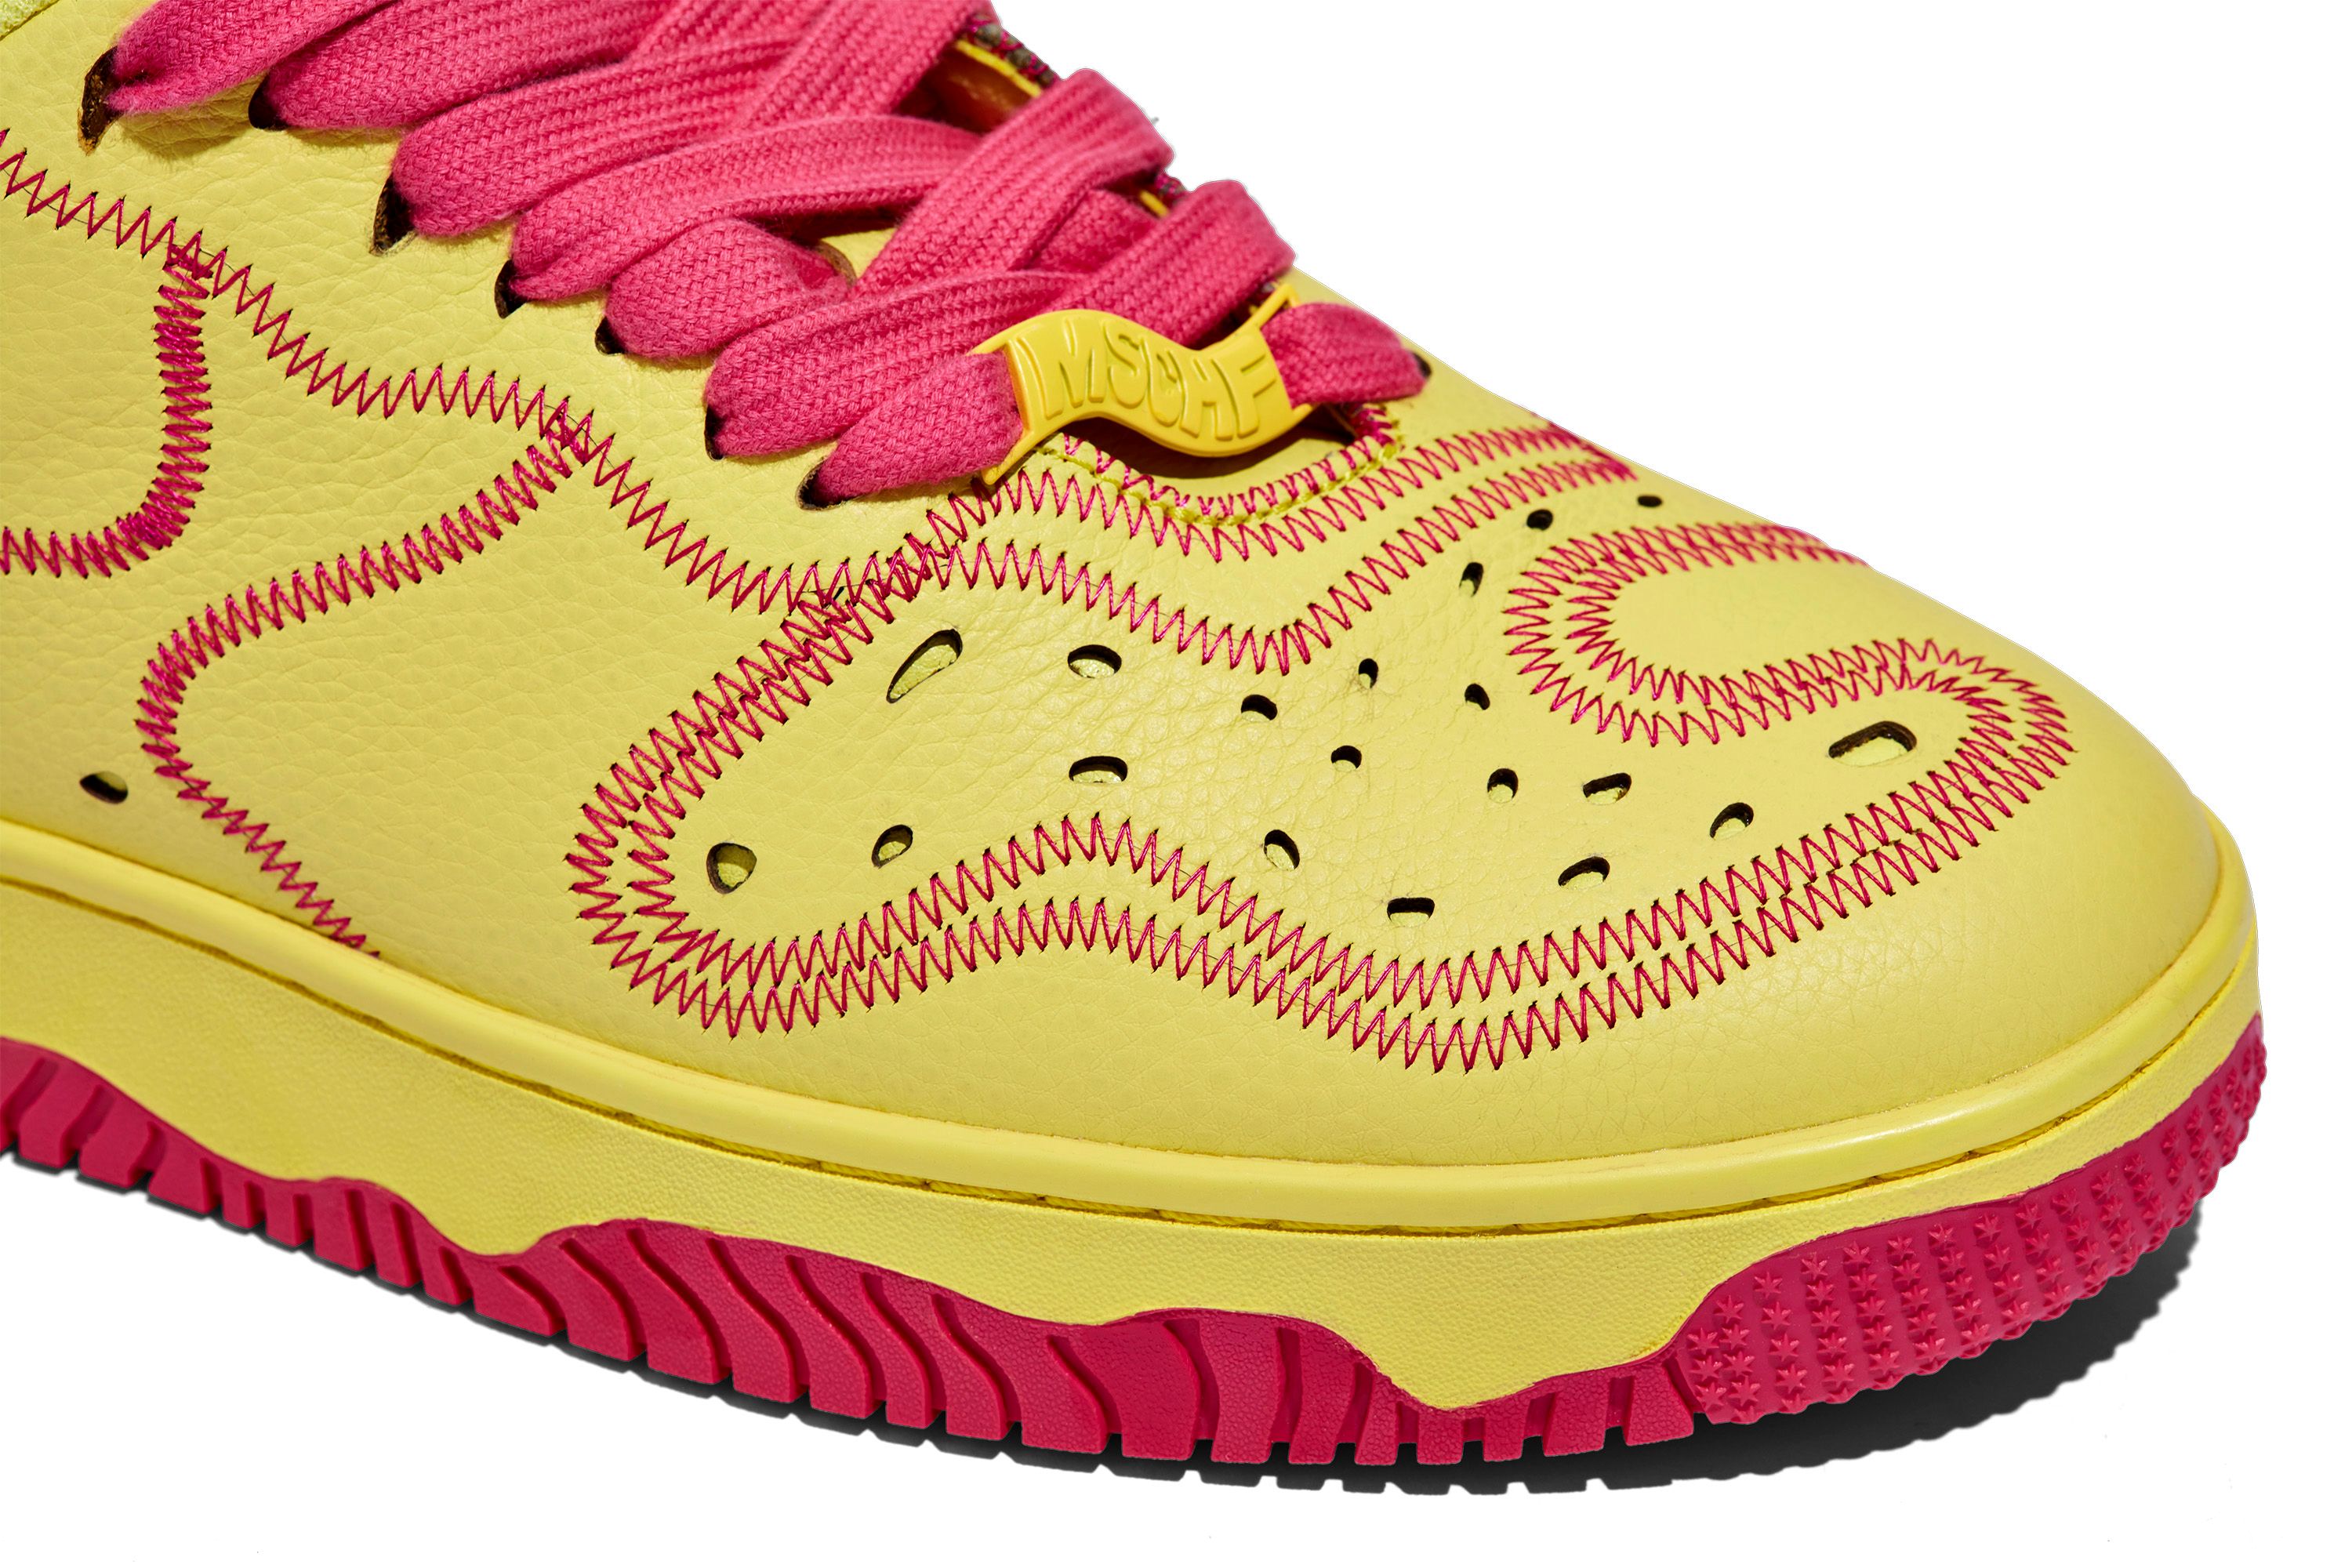 TheSiteSupply Images MSCHF Super Normal 2 “Raspberry Lemonade” F&F 230605 Shoes 8676 Release Info